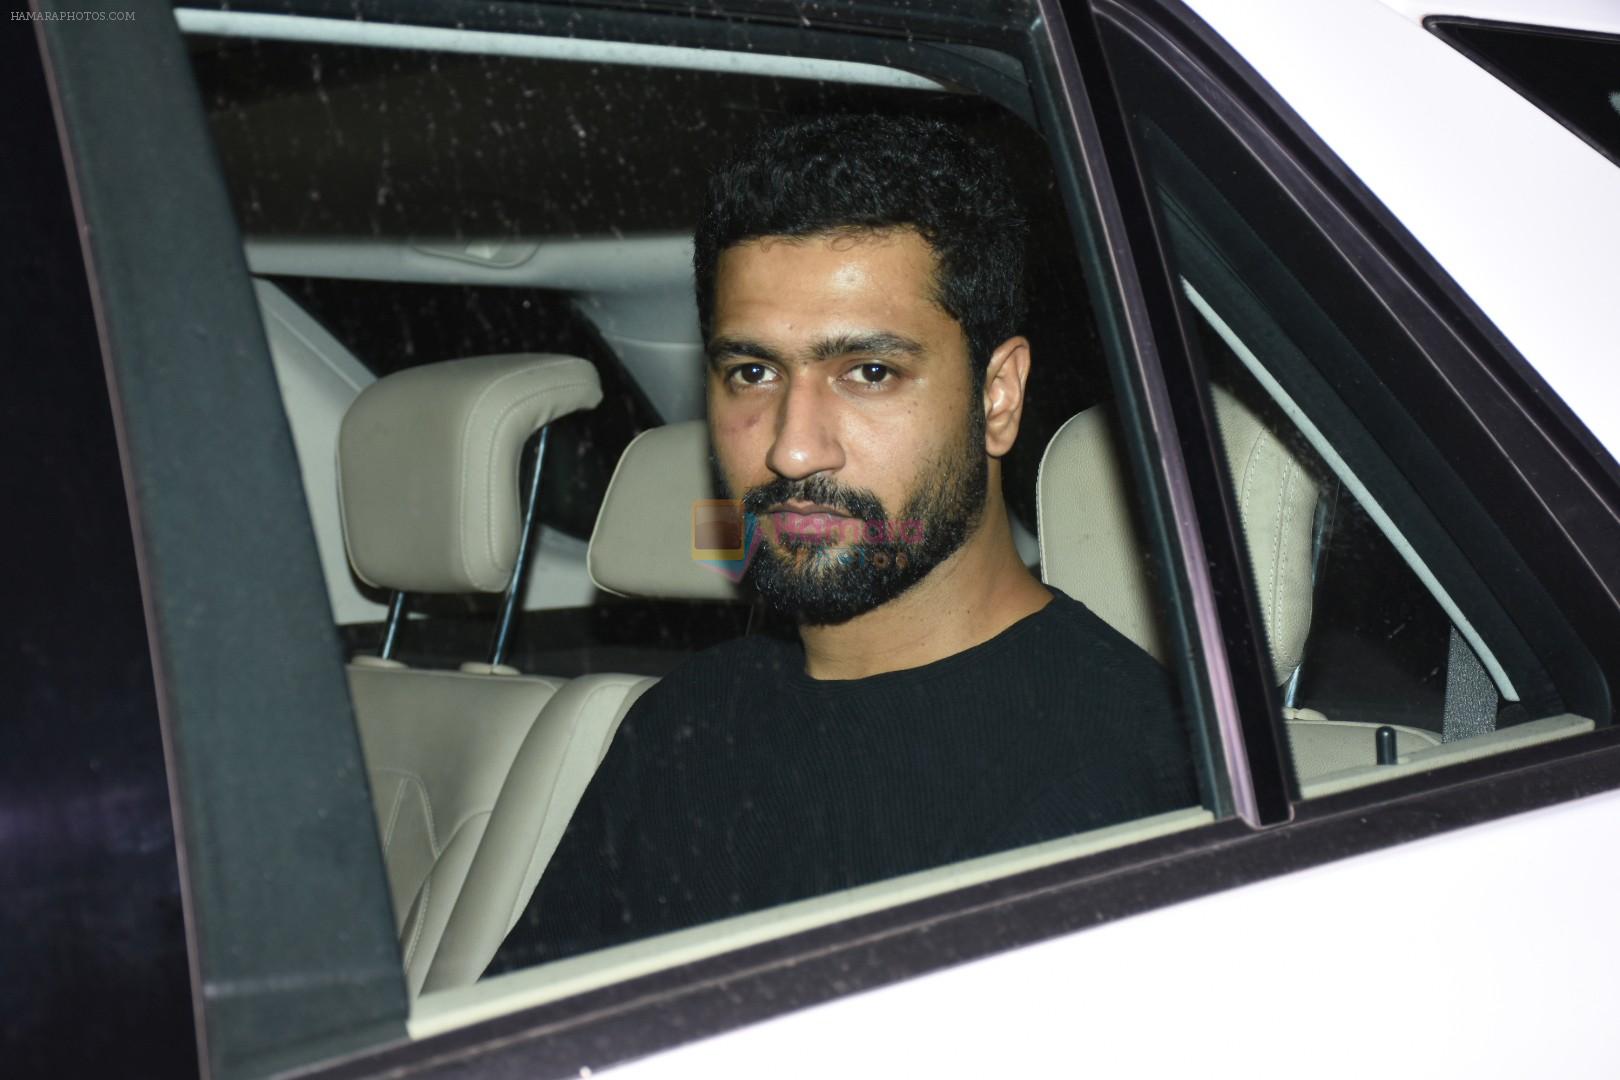 Vicky Kaushal attend party at Karan Johar's house in bandra on 12th June 2019